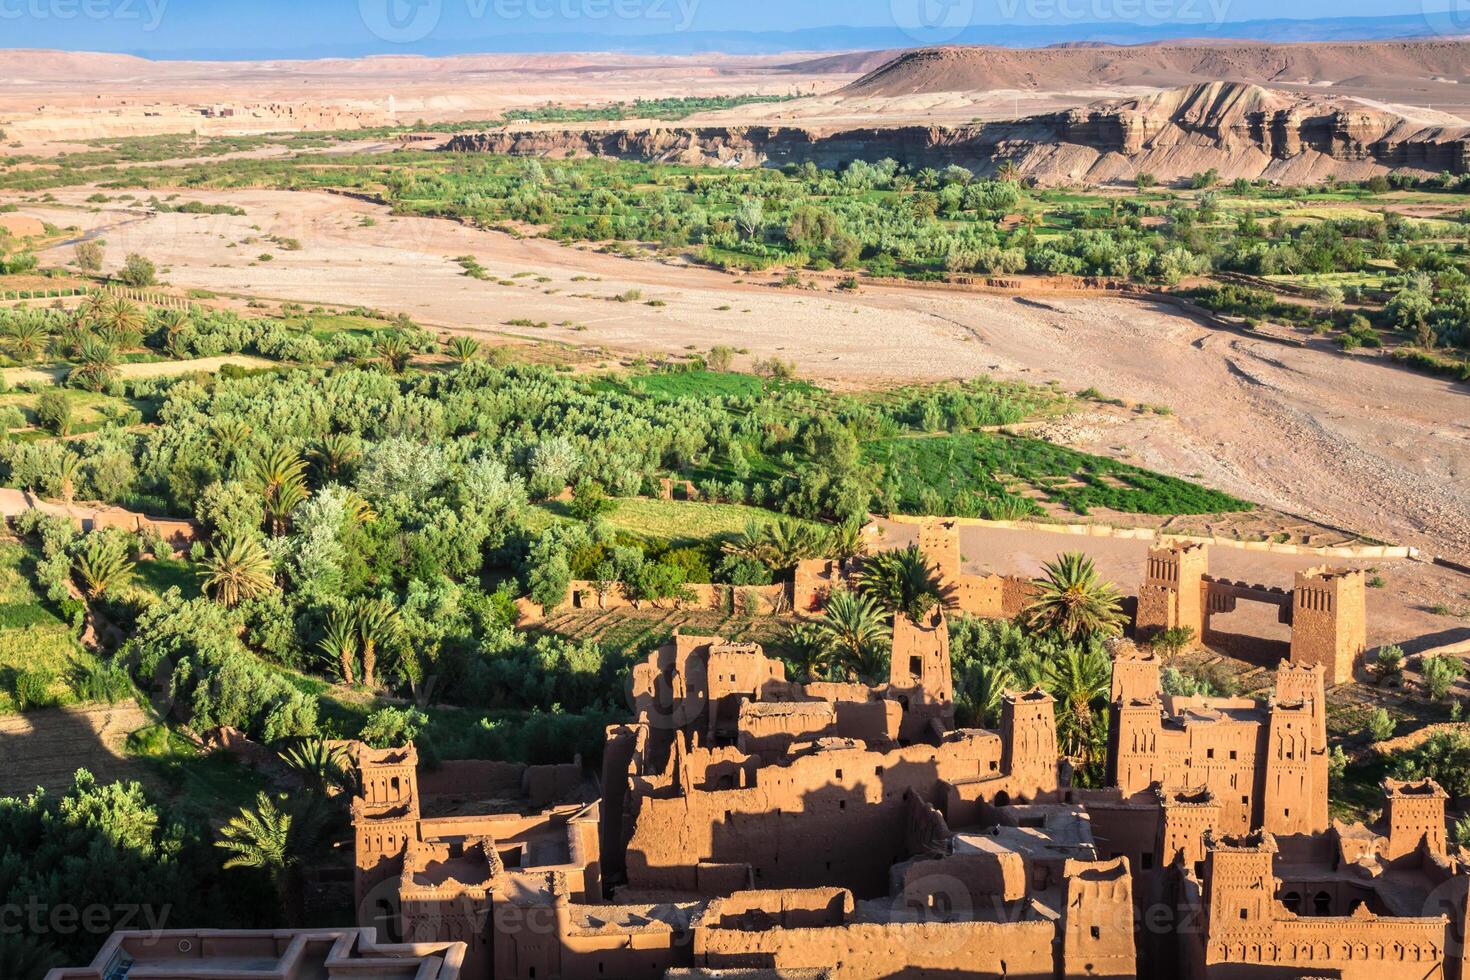 Ait Benhaddou is a fortified city, or ksar, along the former caravan route between the Sahara and Marrakech in Morocco. photo